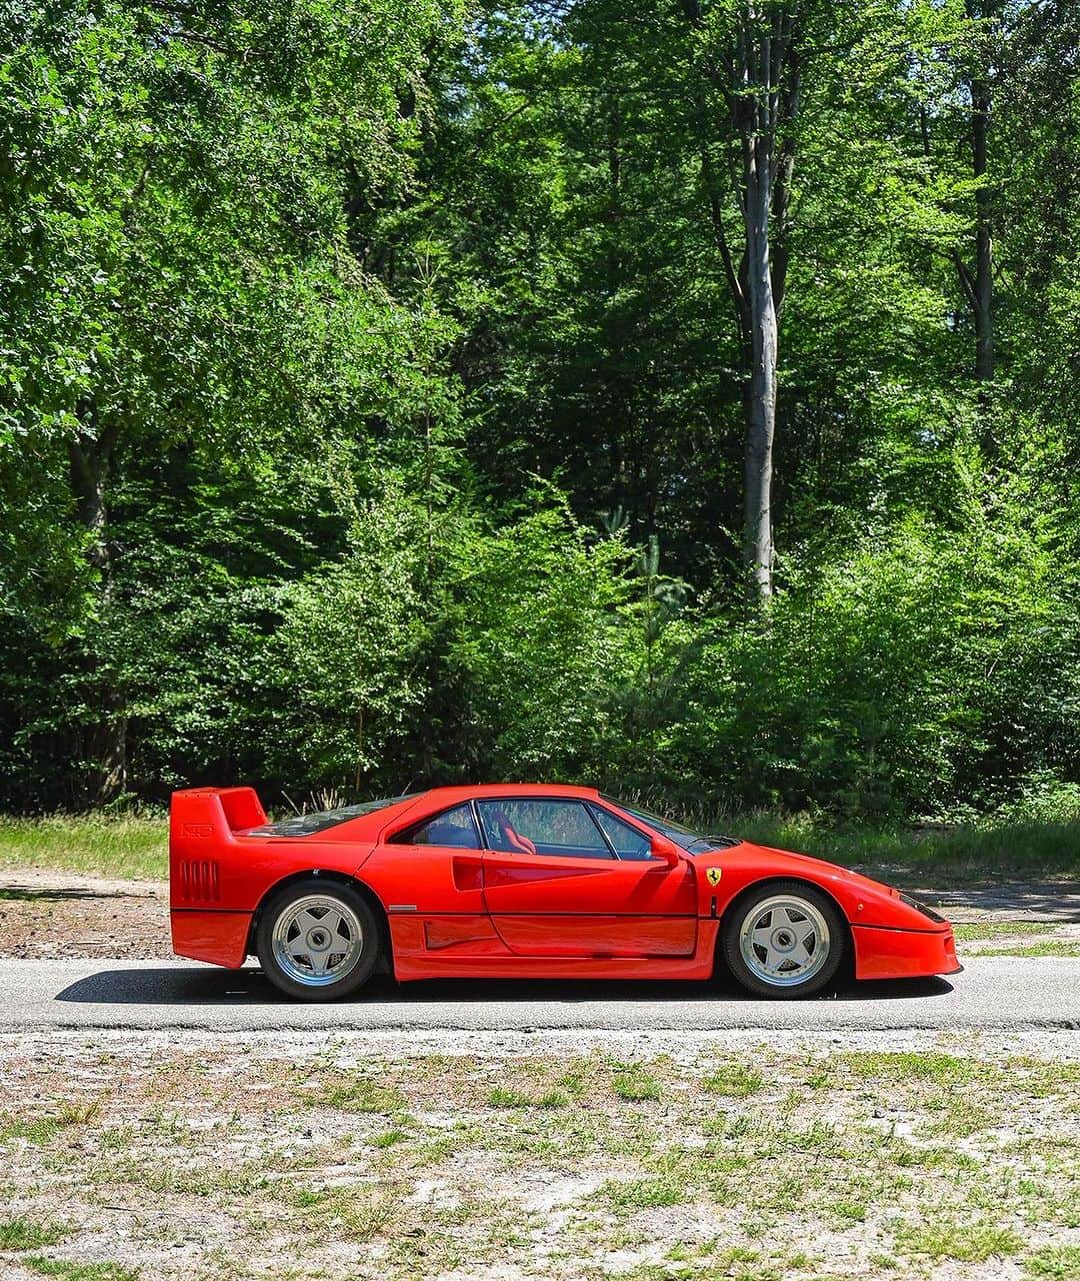 CarsWithoutLimitsのインスタグラム：「In 1987, @Ferrari unleashed the awe-inspiring F40, a masterpiece limited to a mere 1,311 units between 1987 and 1992. This legendary beauty marked the final chapter where the great Enzo Ferrari himself graced its creation.  Photos via @ferrarikroymans 📸, we pay tribute to the essence of speed, power, and design embodied in the #FerrariF40. 💯 Join us in a journey through automotive history as we admire this timeless marvel.  #F40Anniversary #FerrariLegacy #SupercarSunday #CarEnthusiast #CarPorn #CarsWithoutLimits #ItalianExcellence #AutomotivePassion #Ferrari #F40」